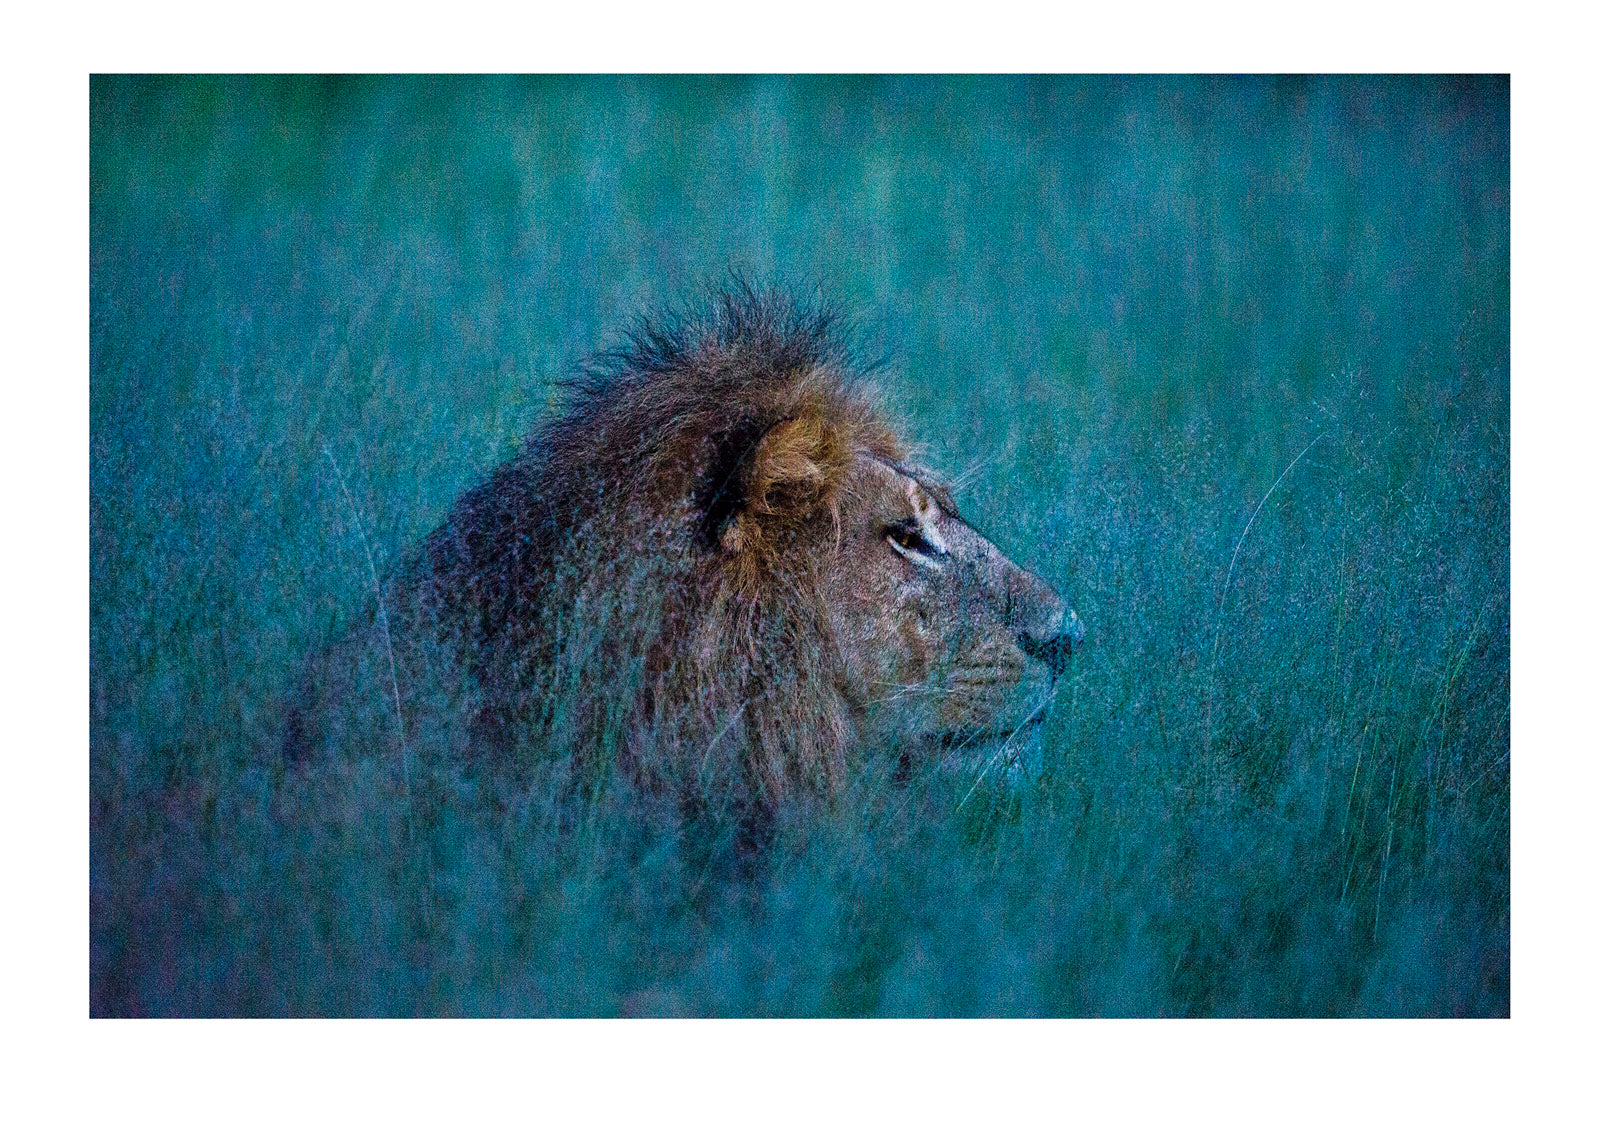 A male African Lion stalking Red Lechwe under moonlight. Duba Plains Camp, Ngamiland West, Botswana.

